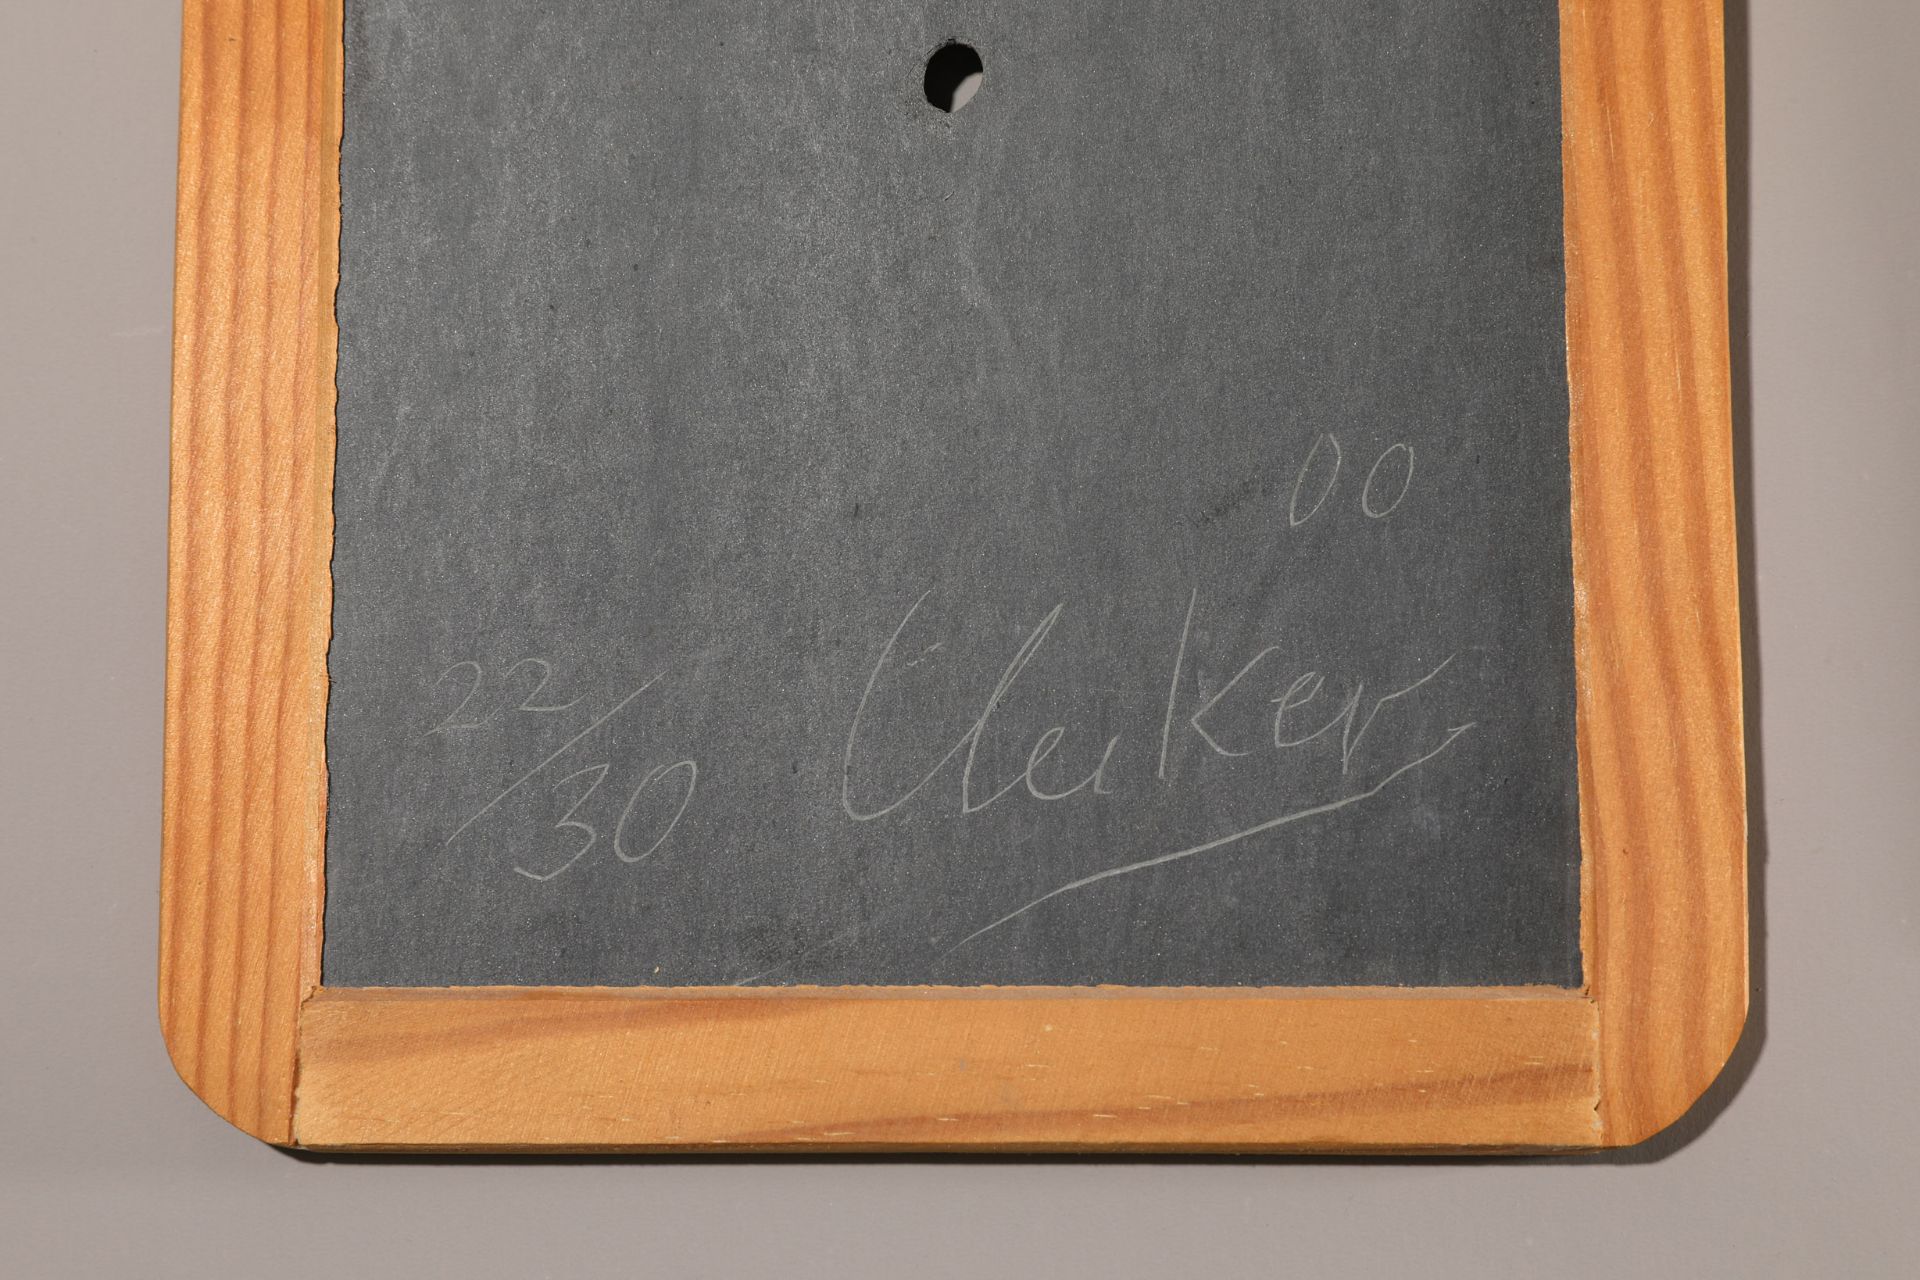 Günther Uecker*, Loch / Hole, 2000, slate, nail, cord, Ex. 22/30 - Image 4 of 6